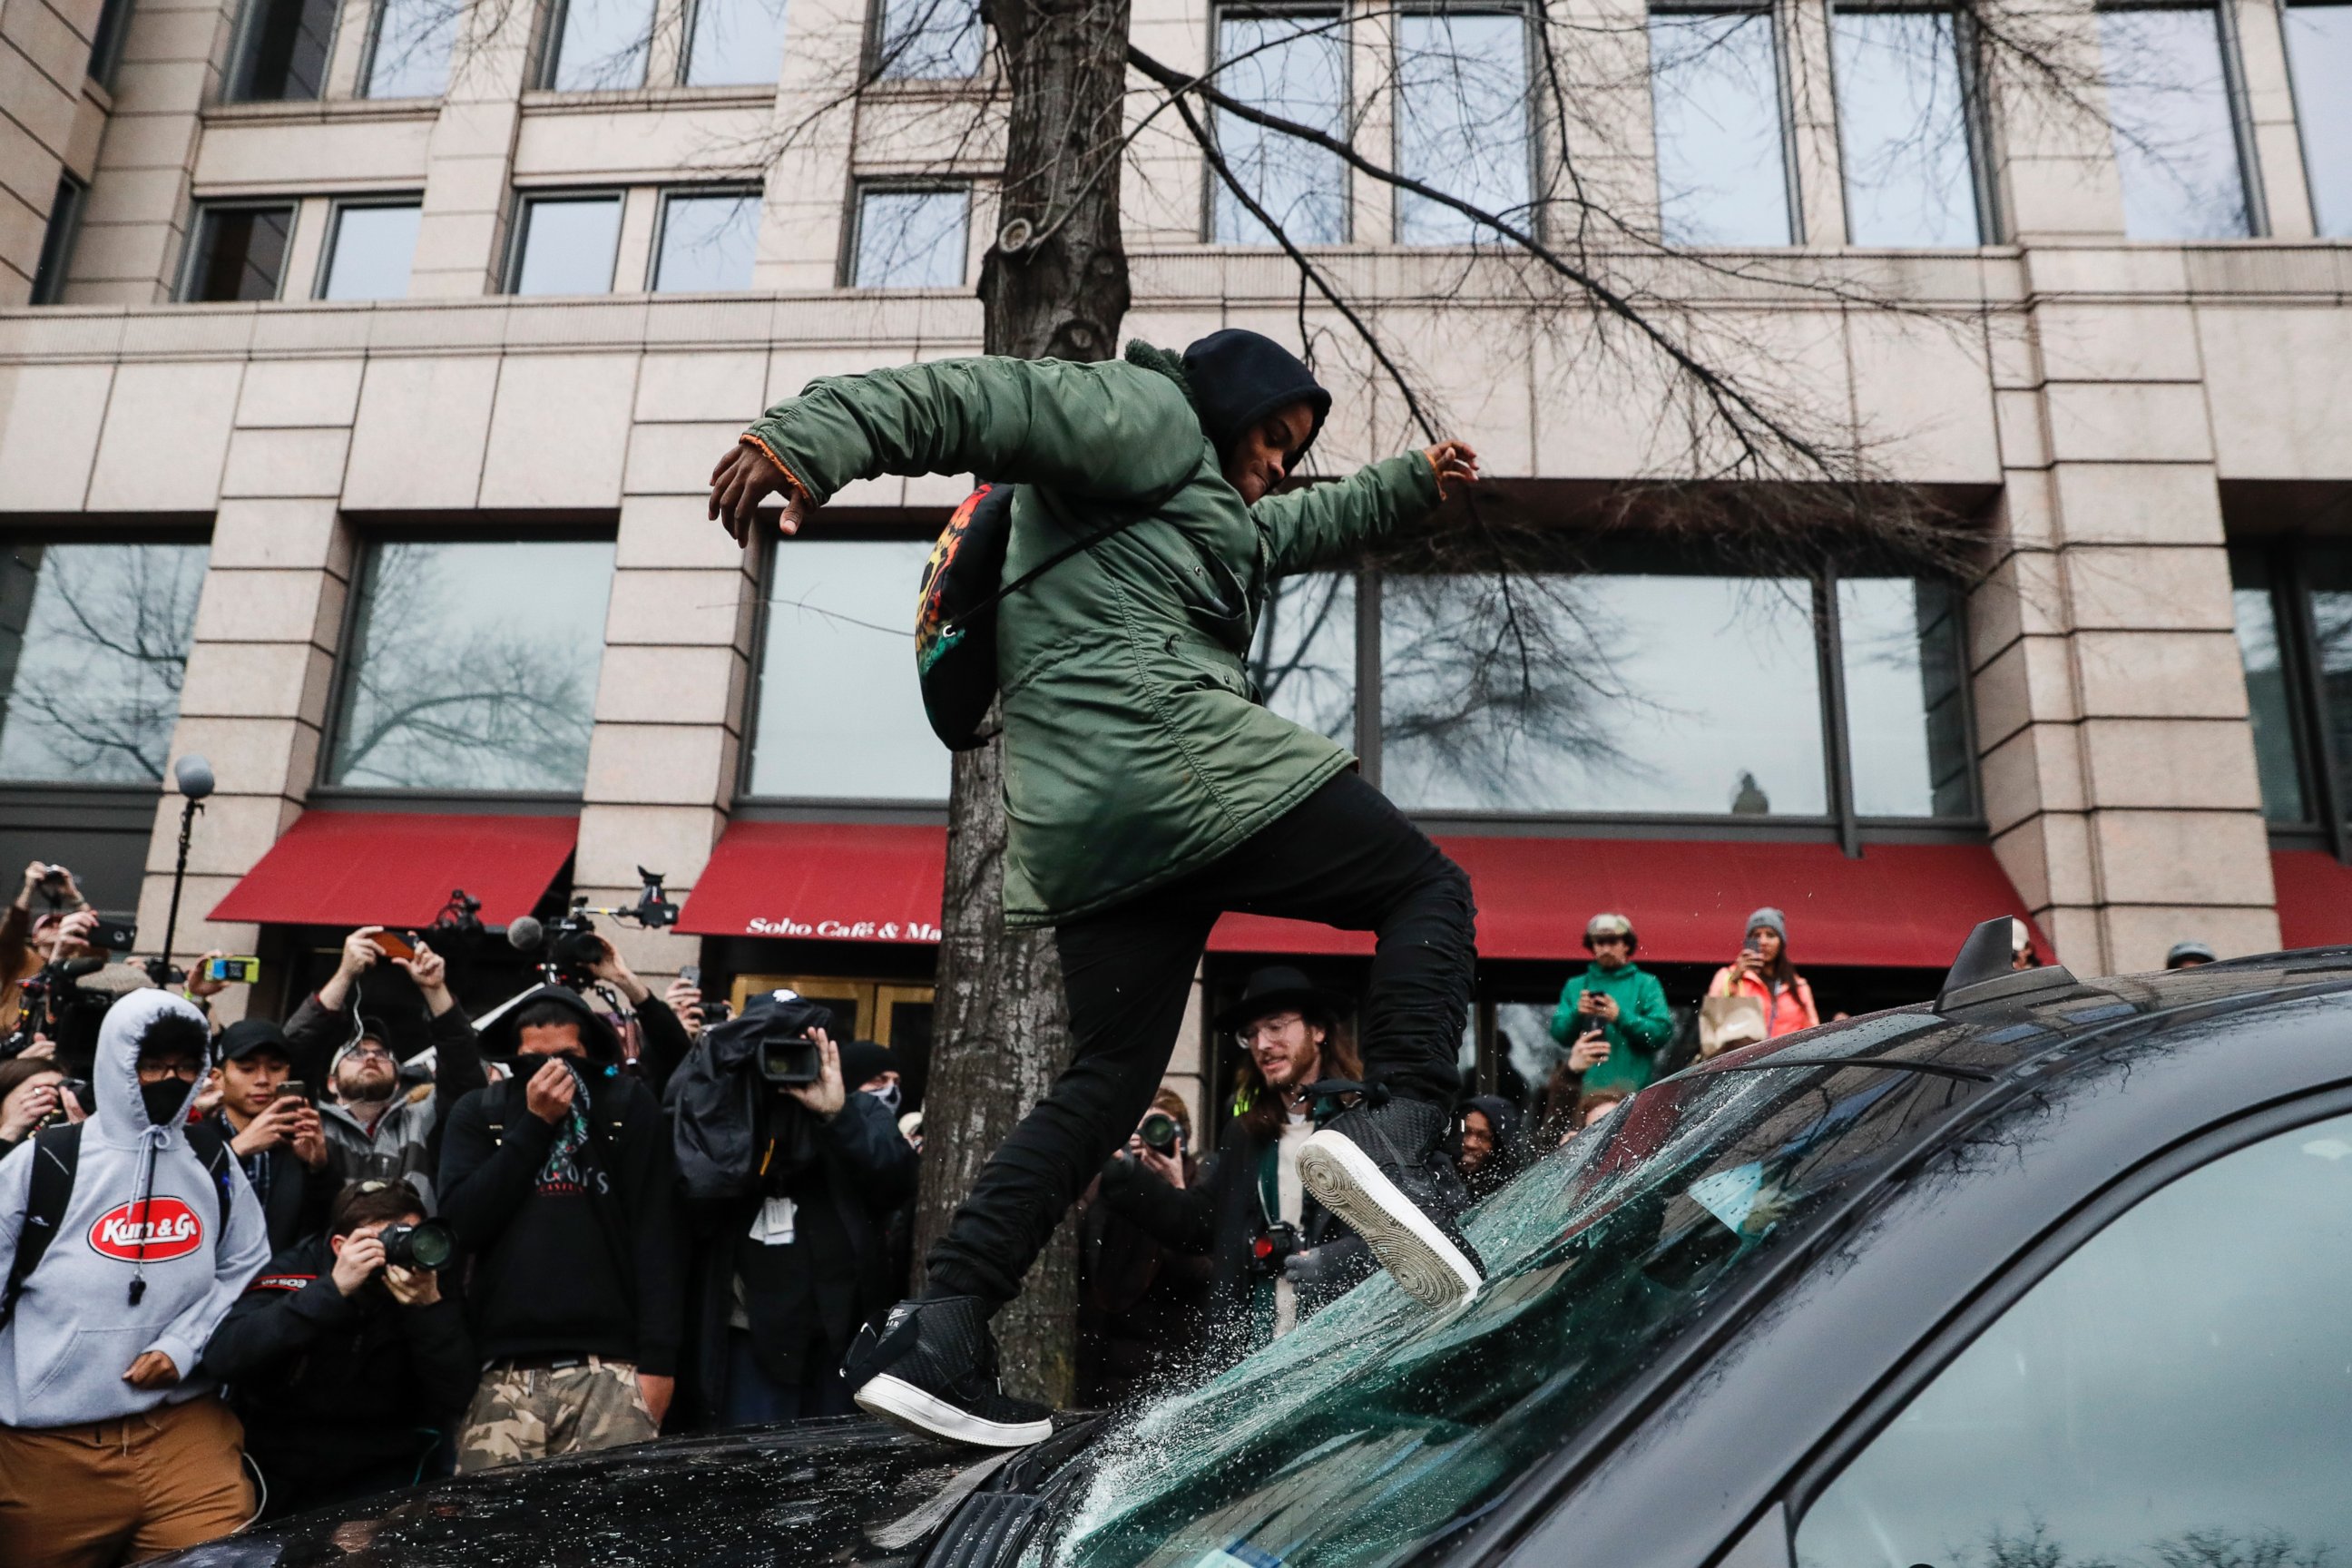 PHOTO: A protester kicks in a windshield during a demonstration in Washington, Jan. 20, 2017, after the inauguration of President Donald Trump.